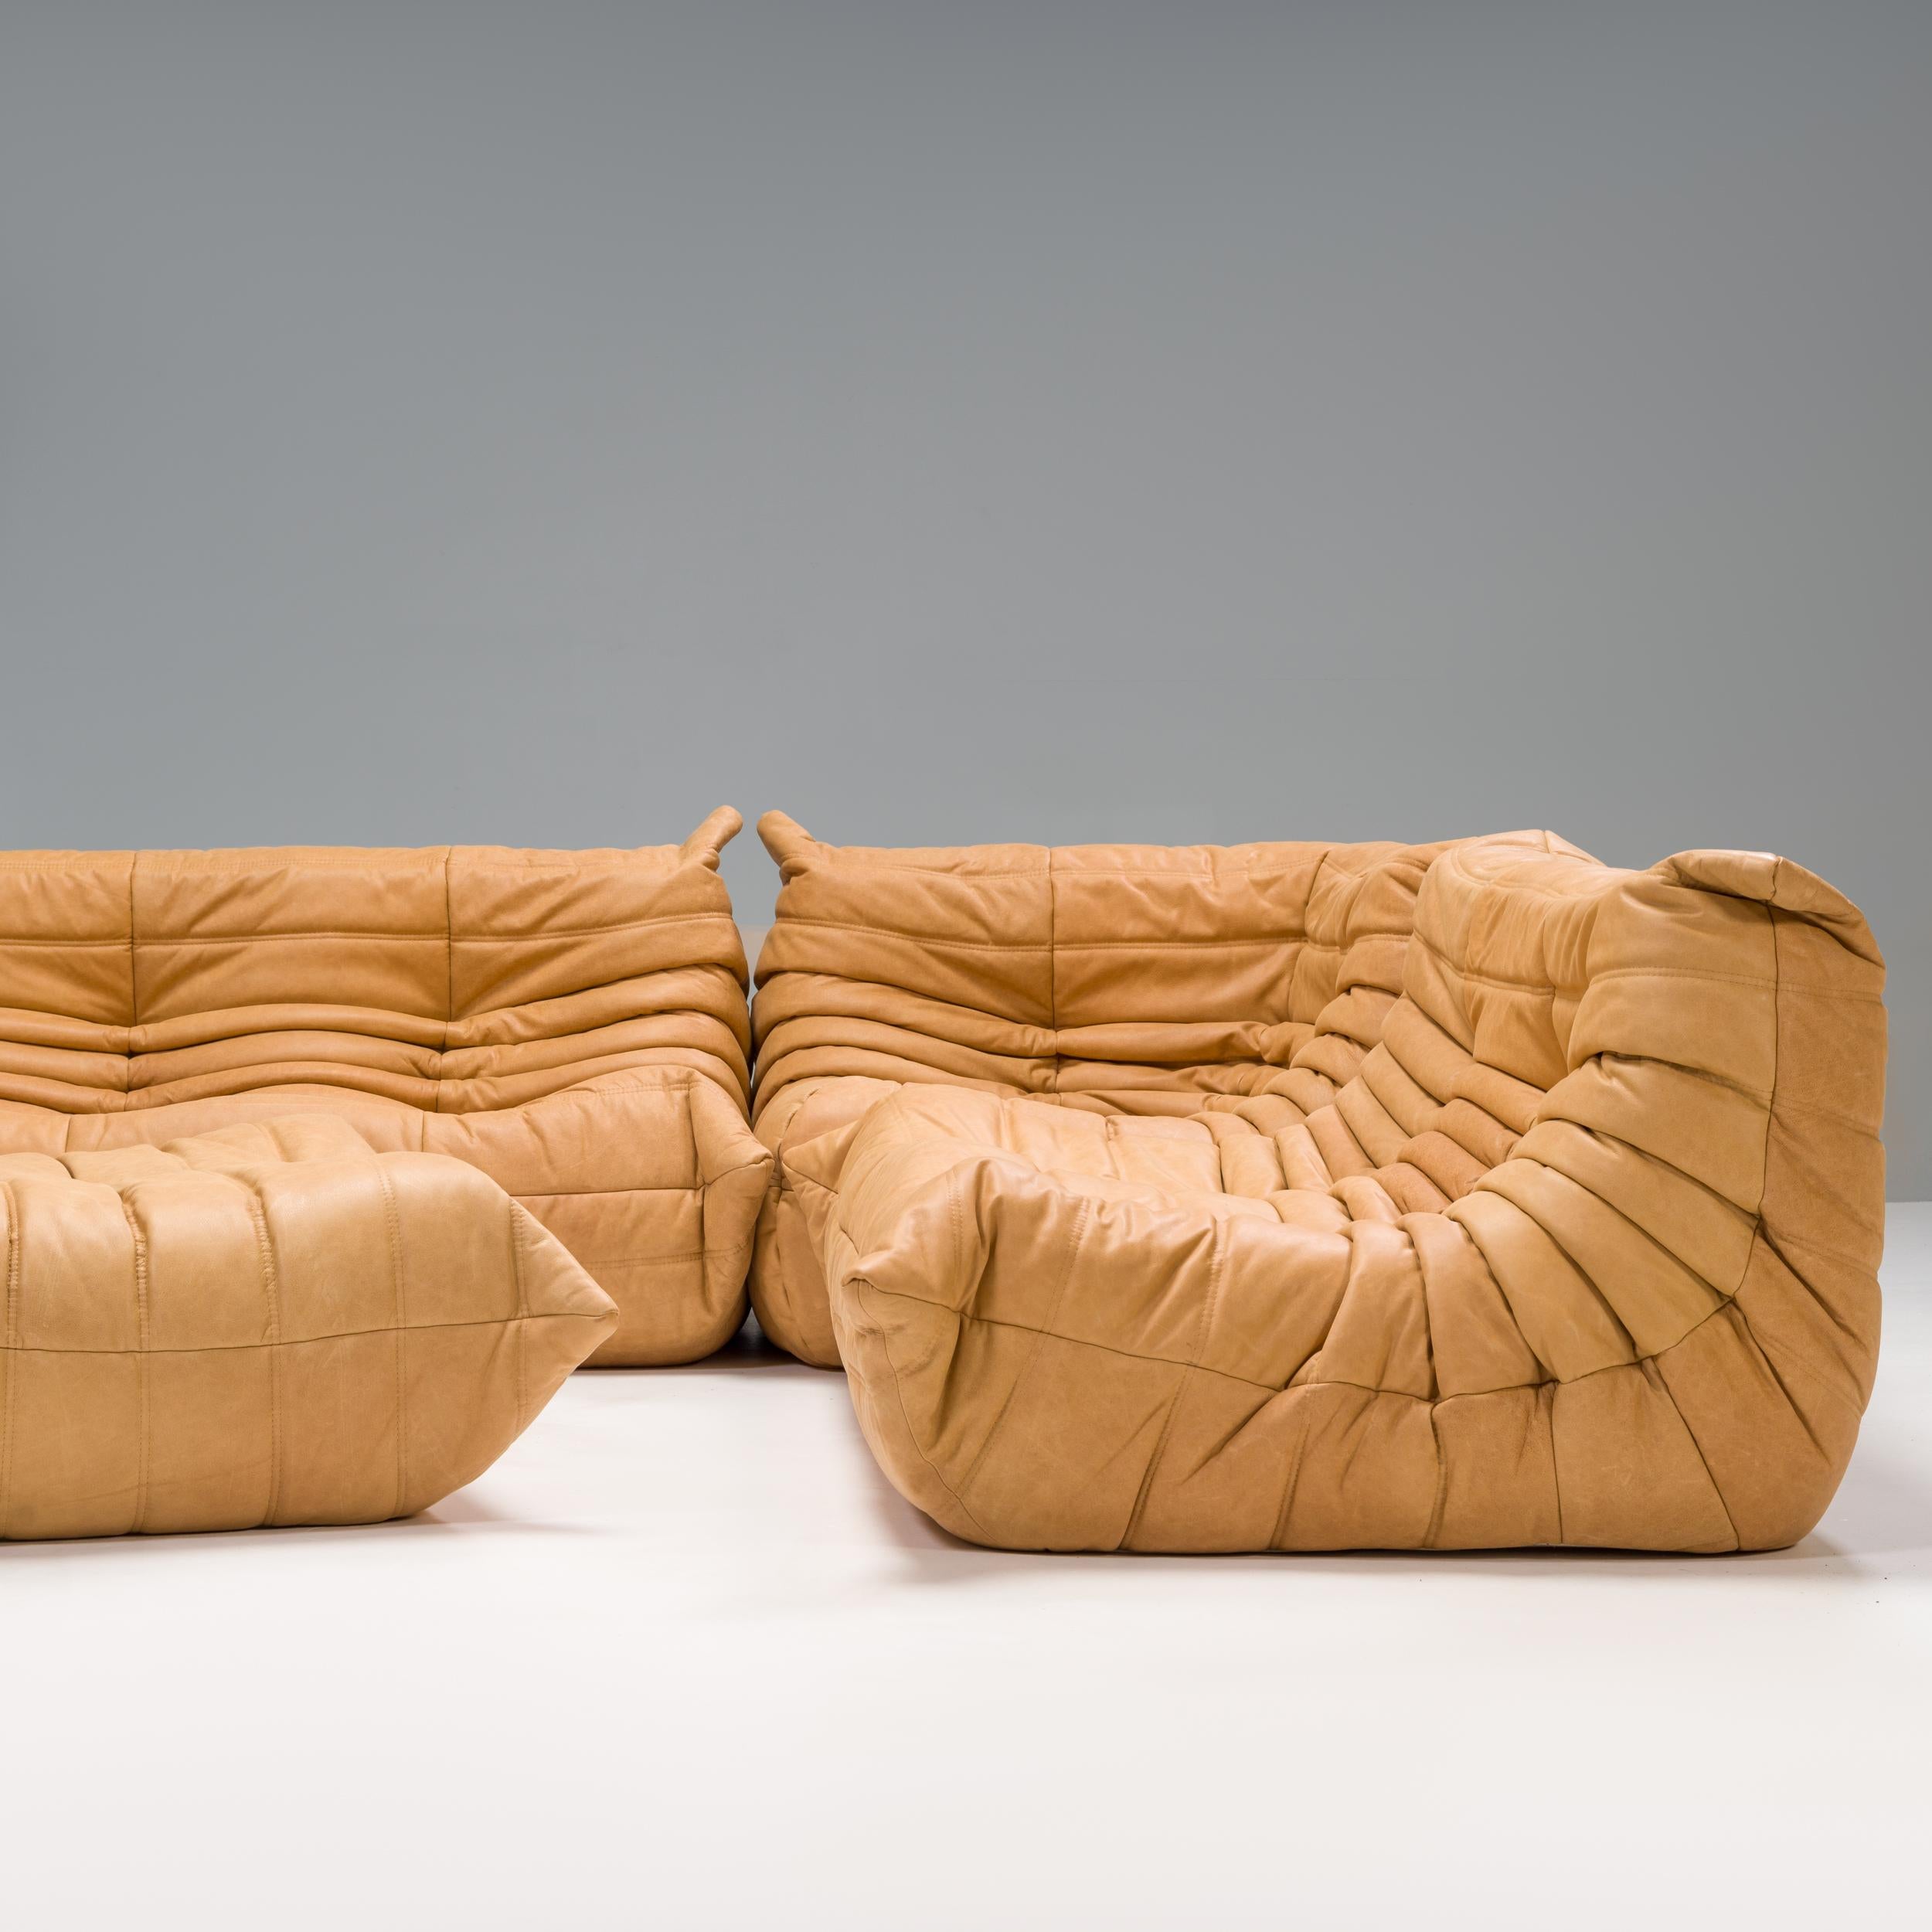 The iconic Togo leather sofa and armchair set, originally designed by Michel Ducaroy for Ligne Roset in 1973, has become a design mid century classic.

The sofas have been newly reupholstered in a soft supple camel leather fabric. Made completely